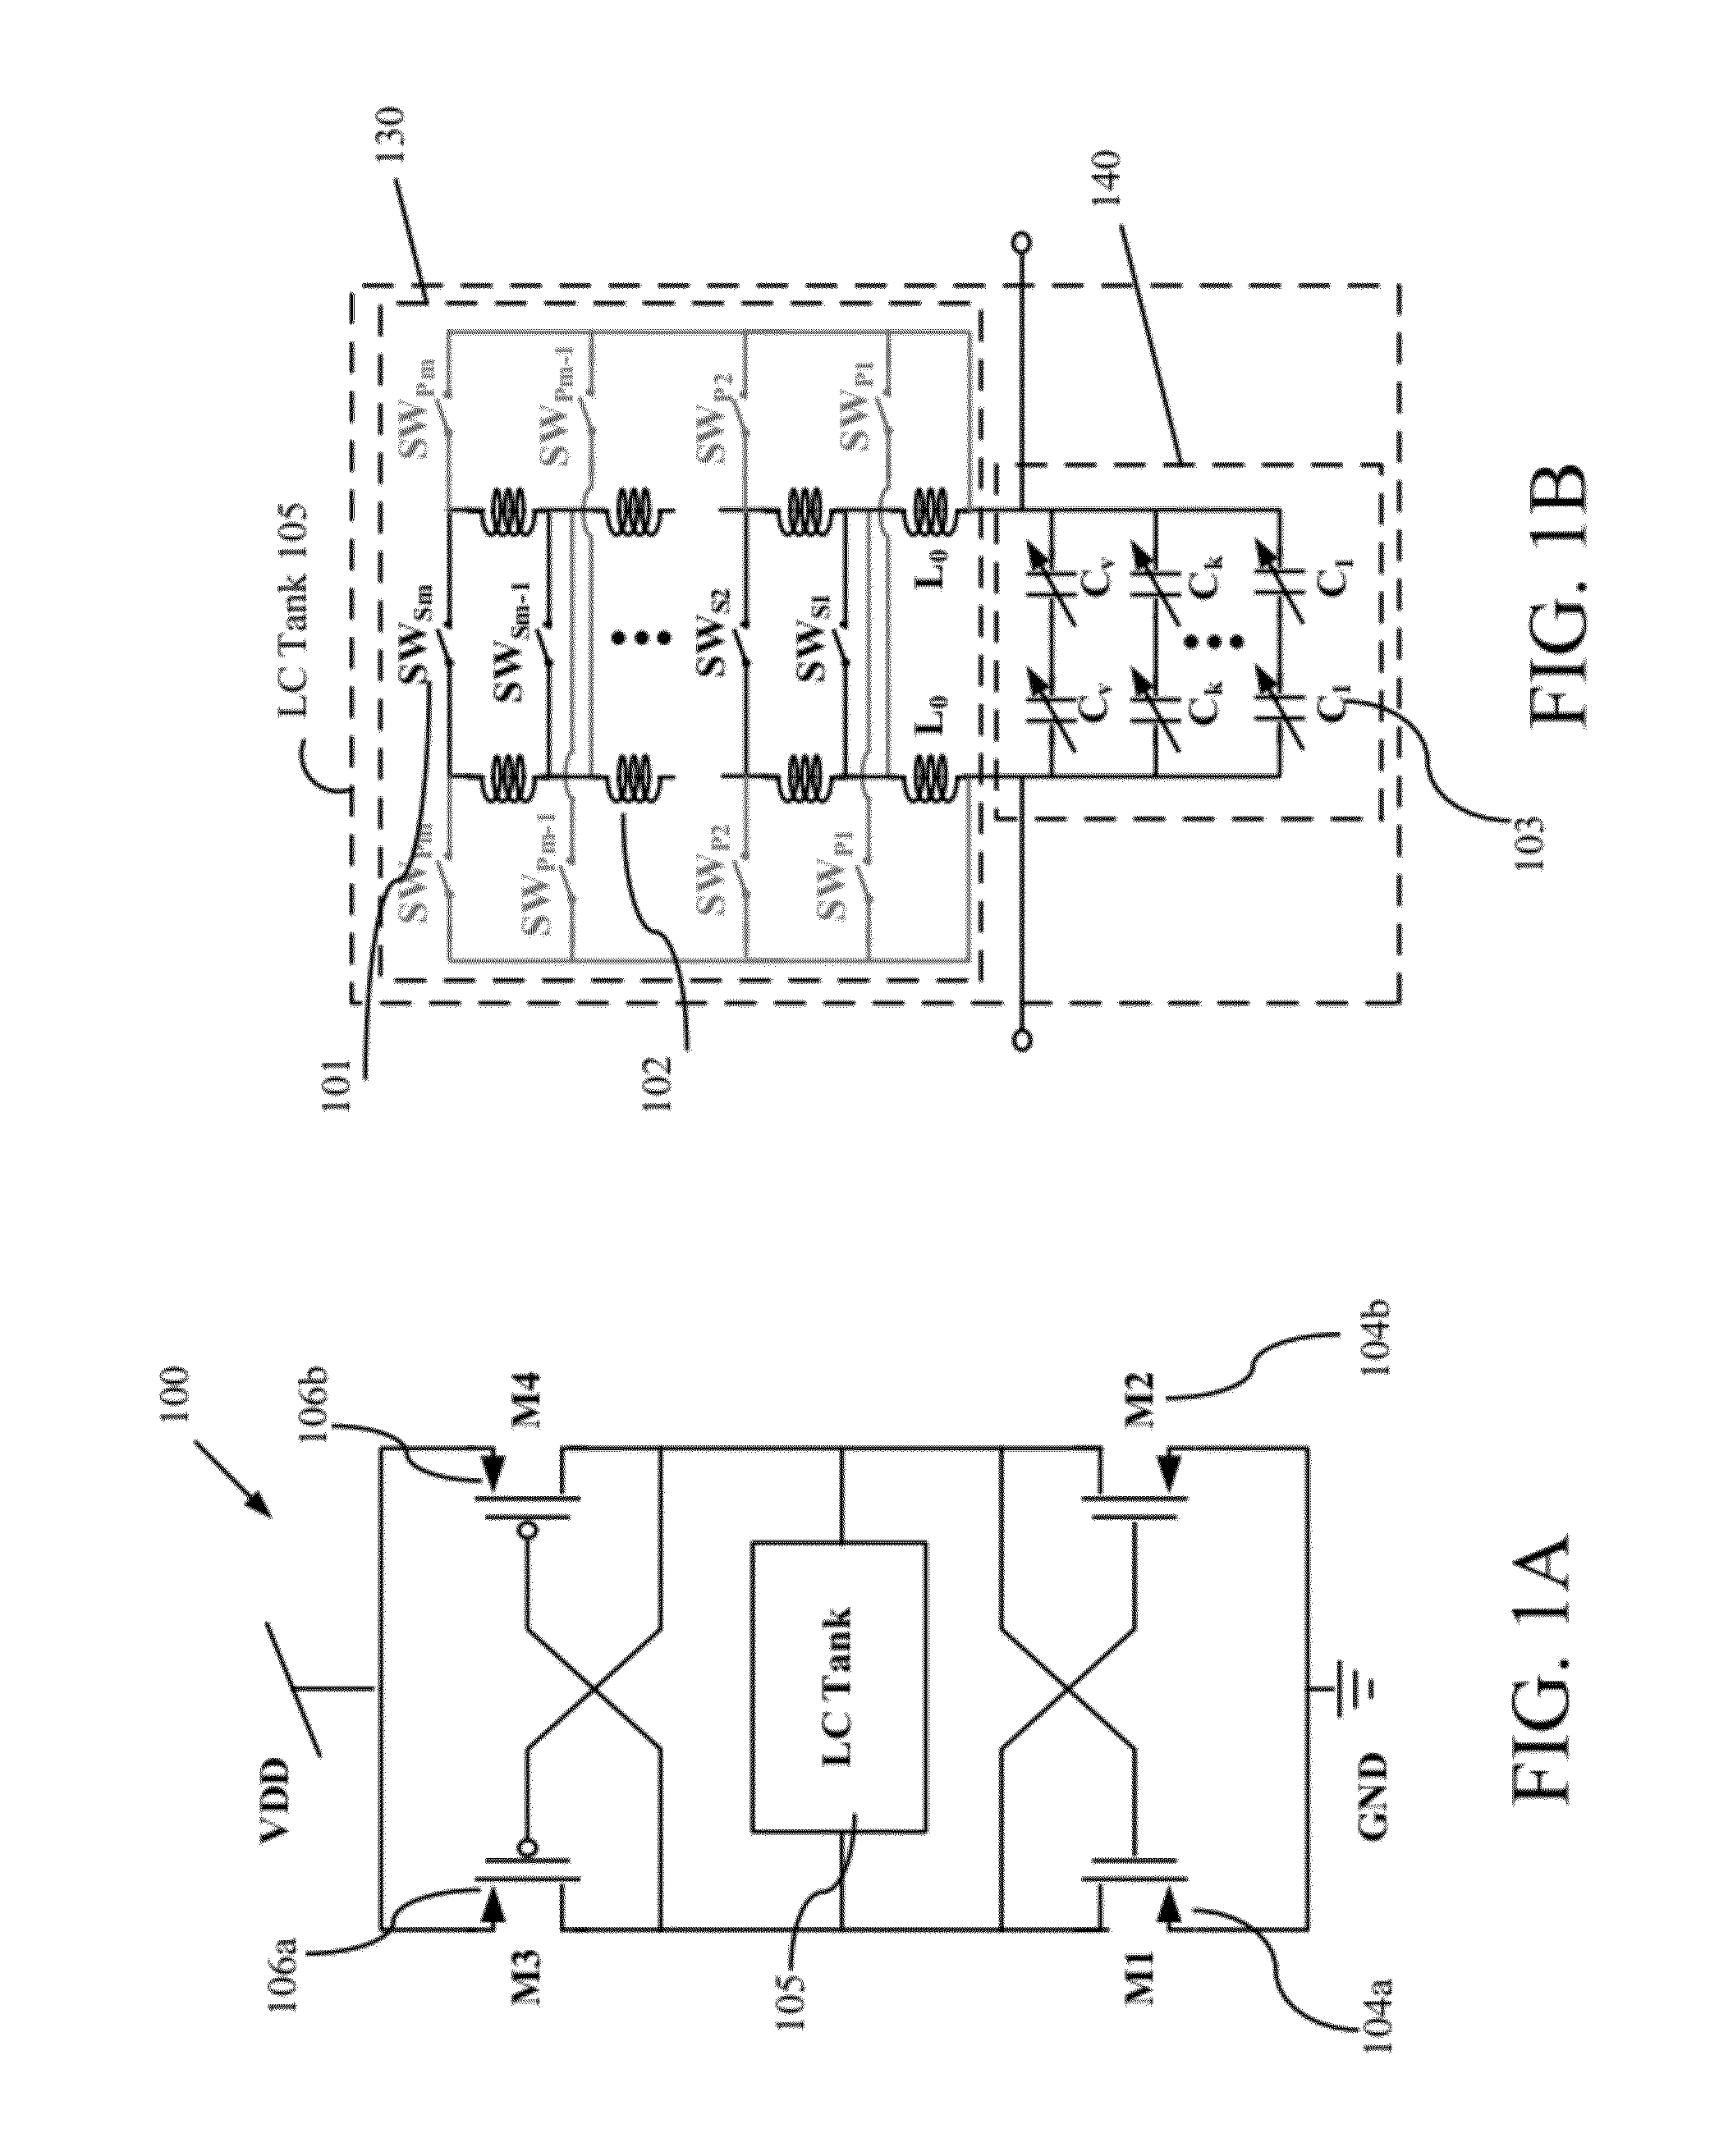 Systems and Methods for Wideband CMOS Voltage-Controlled Oscillators Using Reconfigurable Inductor Arrays